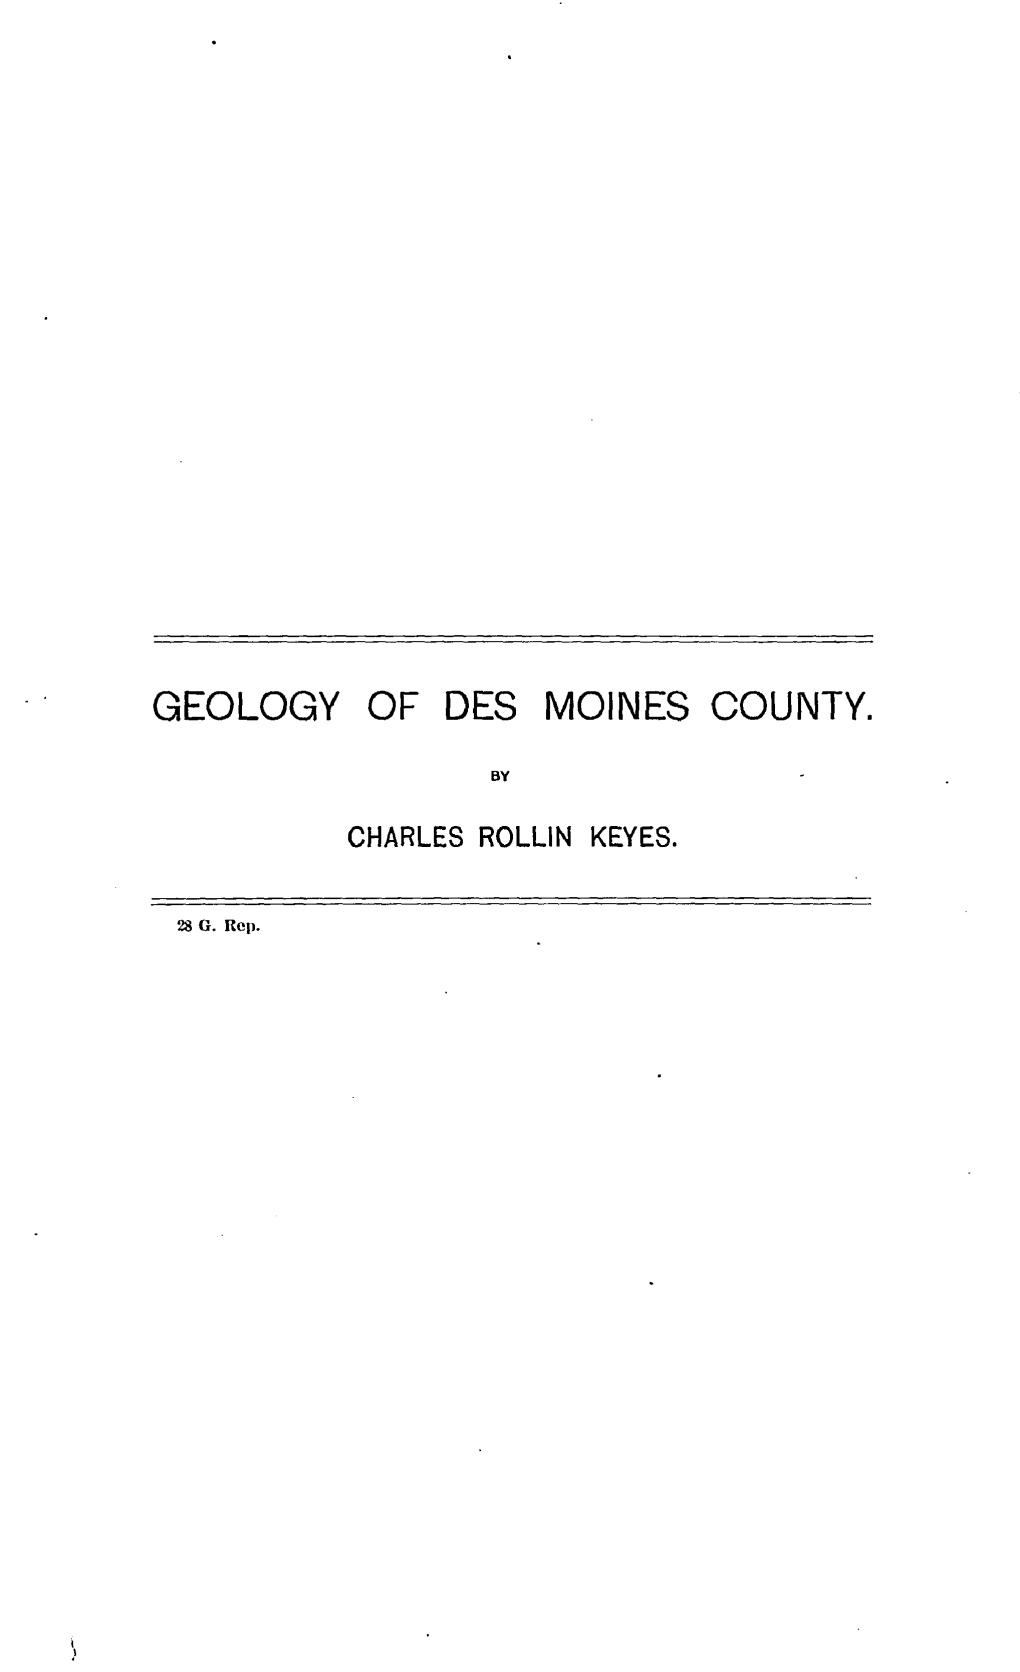 Geology of Des Moines County